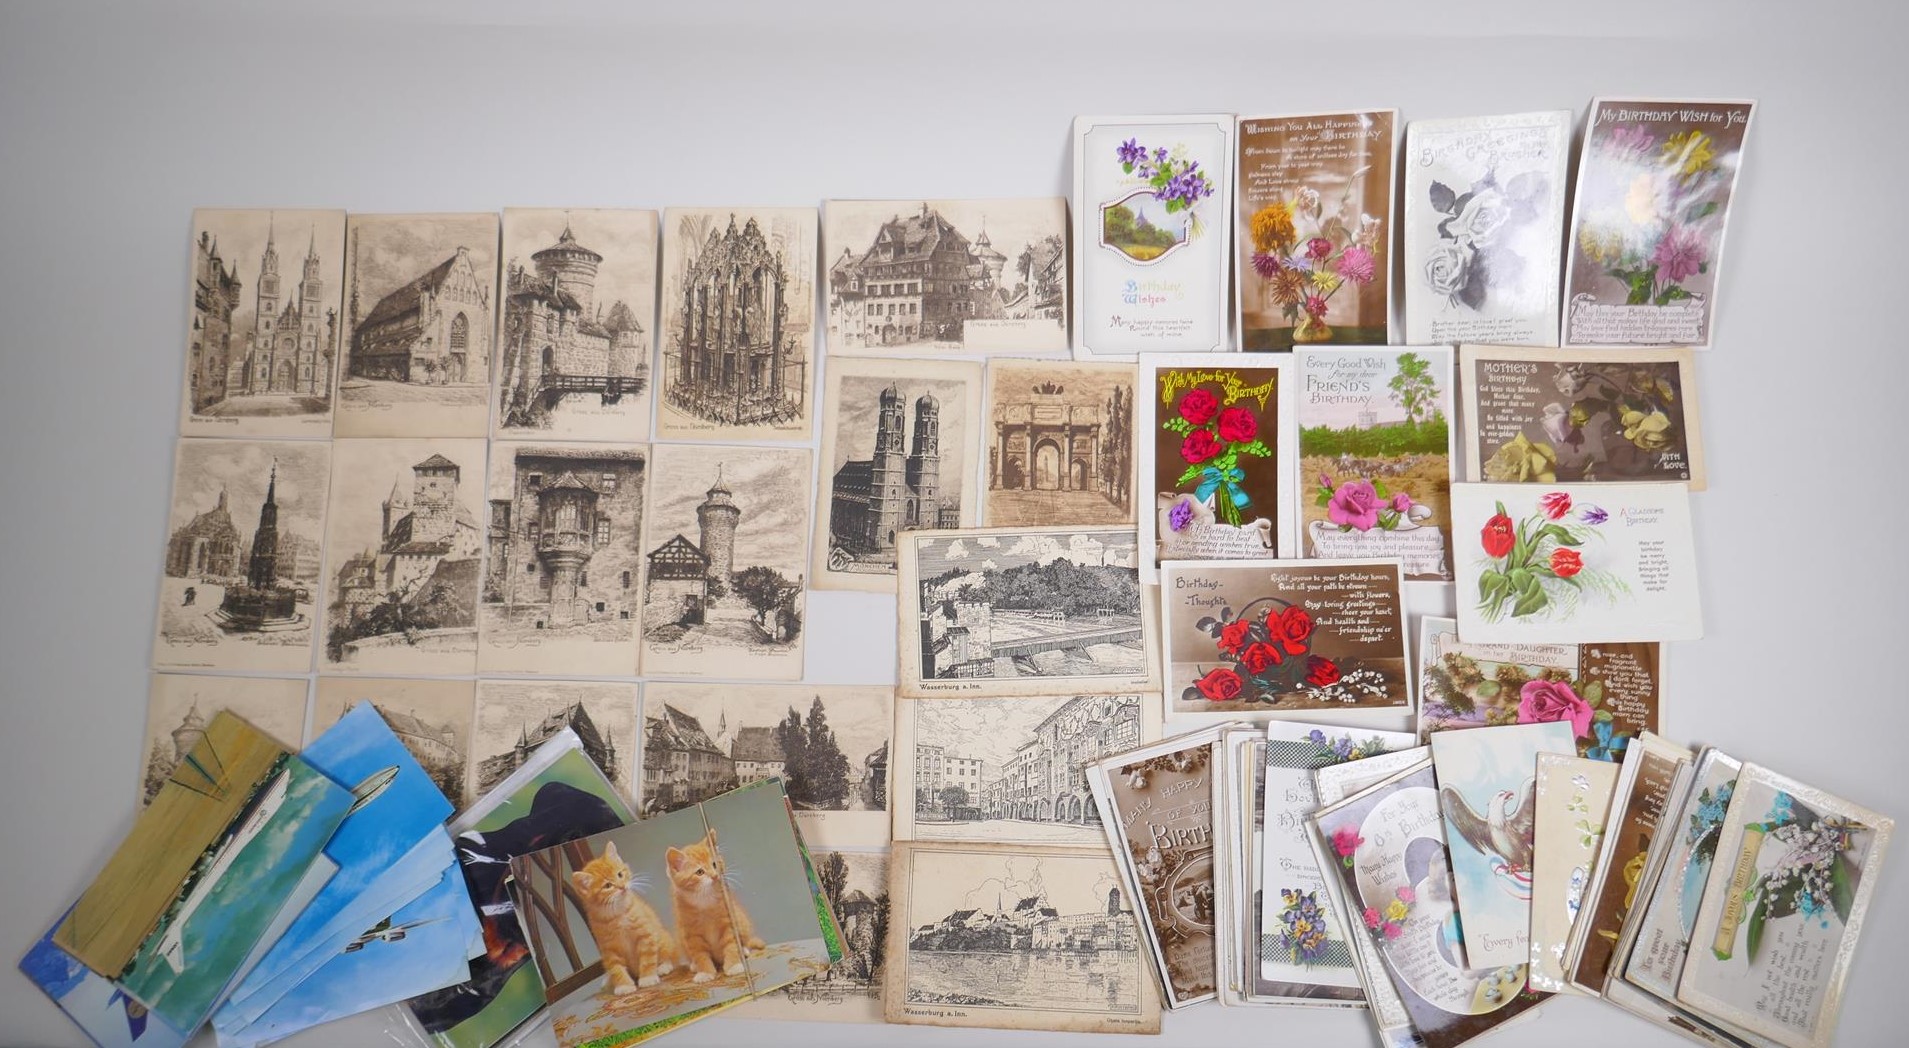 A quantity of late C19th and C20th postcards including engravings of German landmarks, greetings